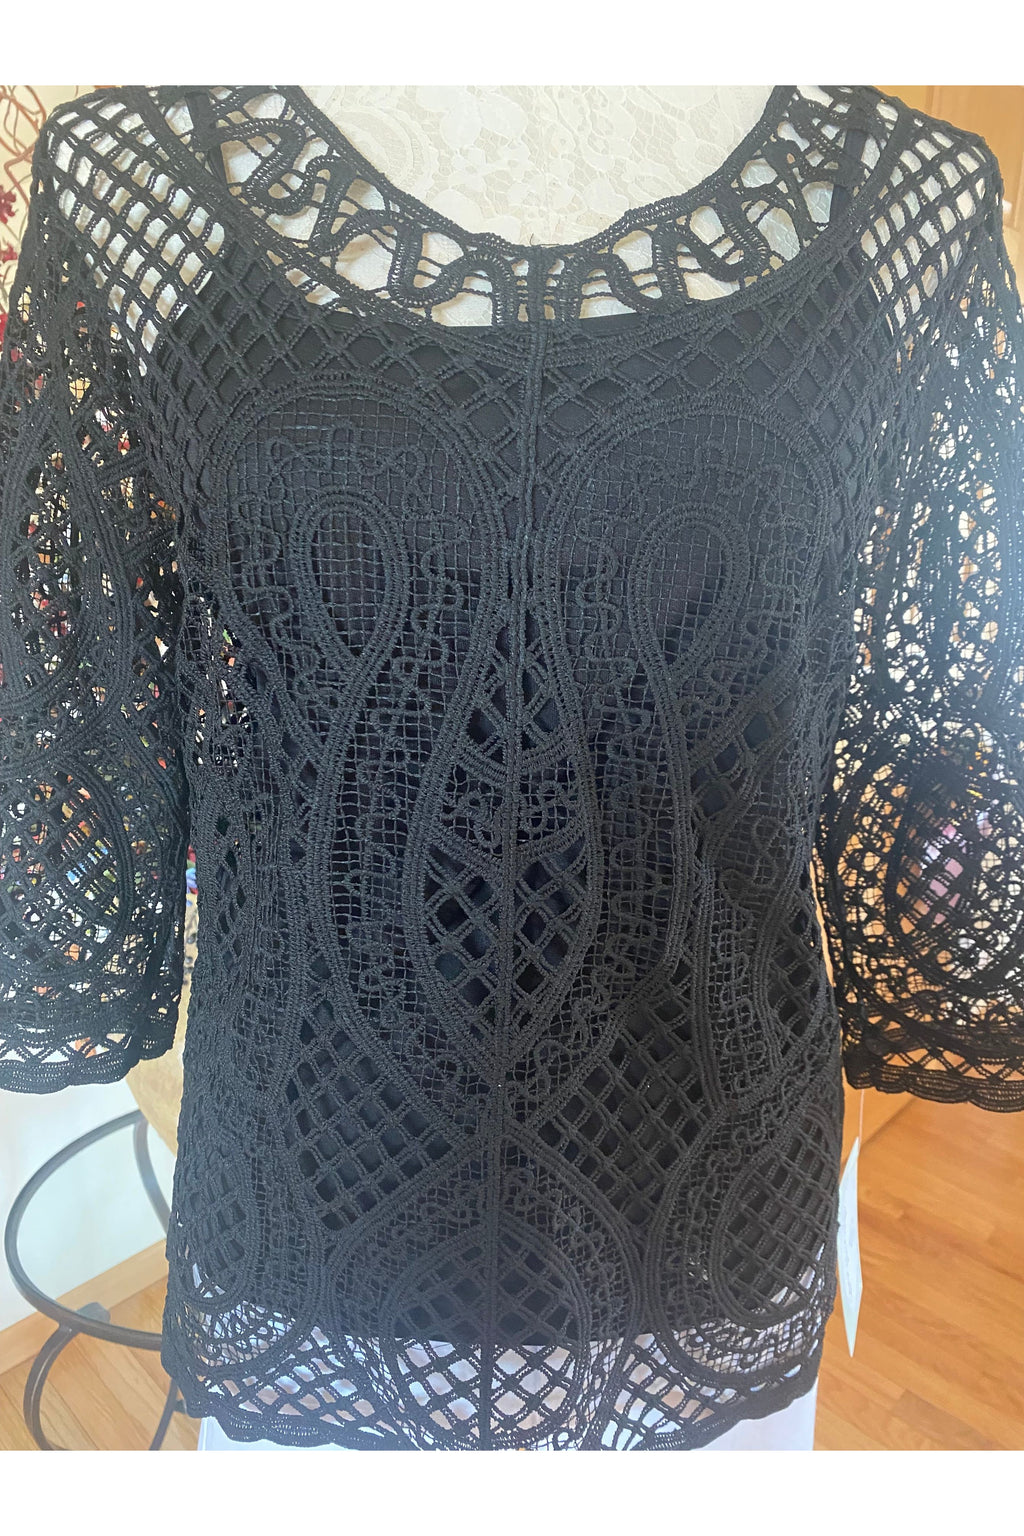 Keren Hart - Pullover See Through Top With Attached Cami - Black